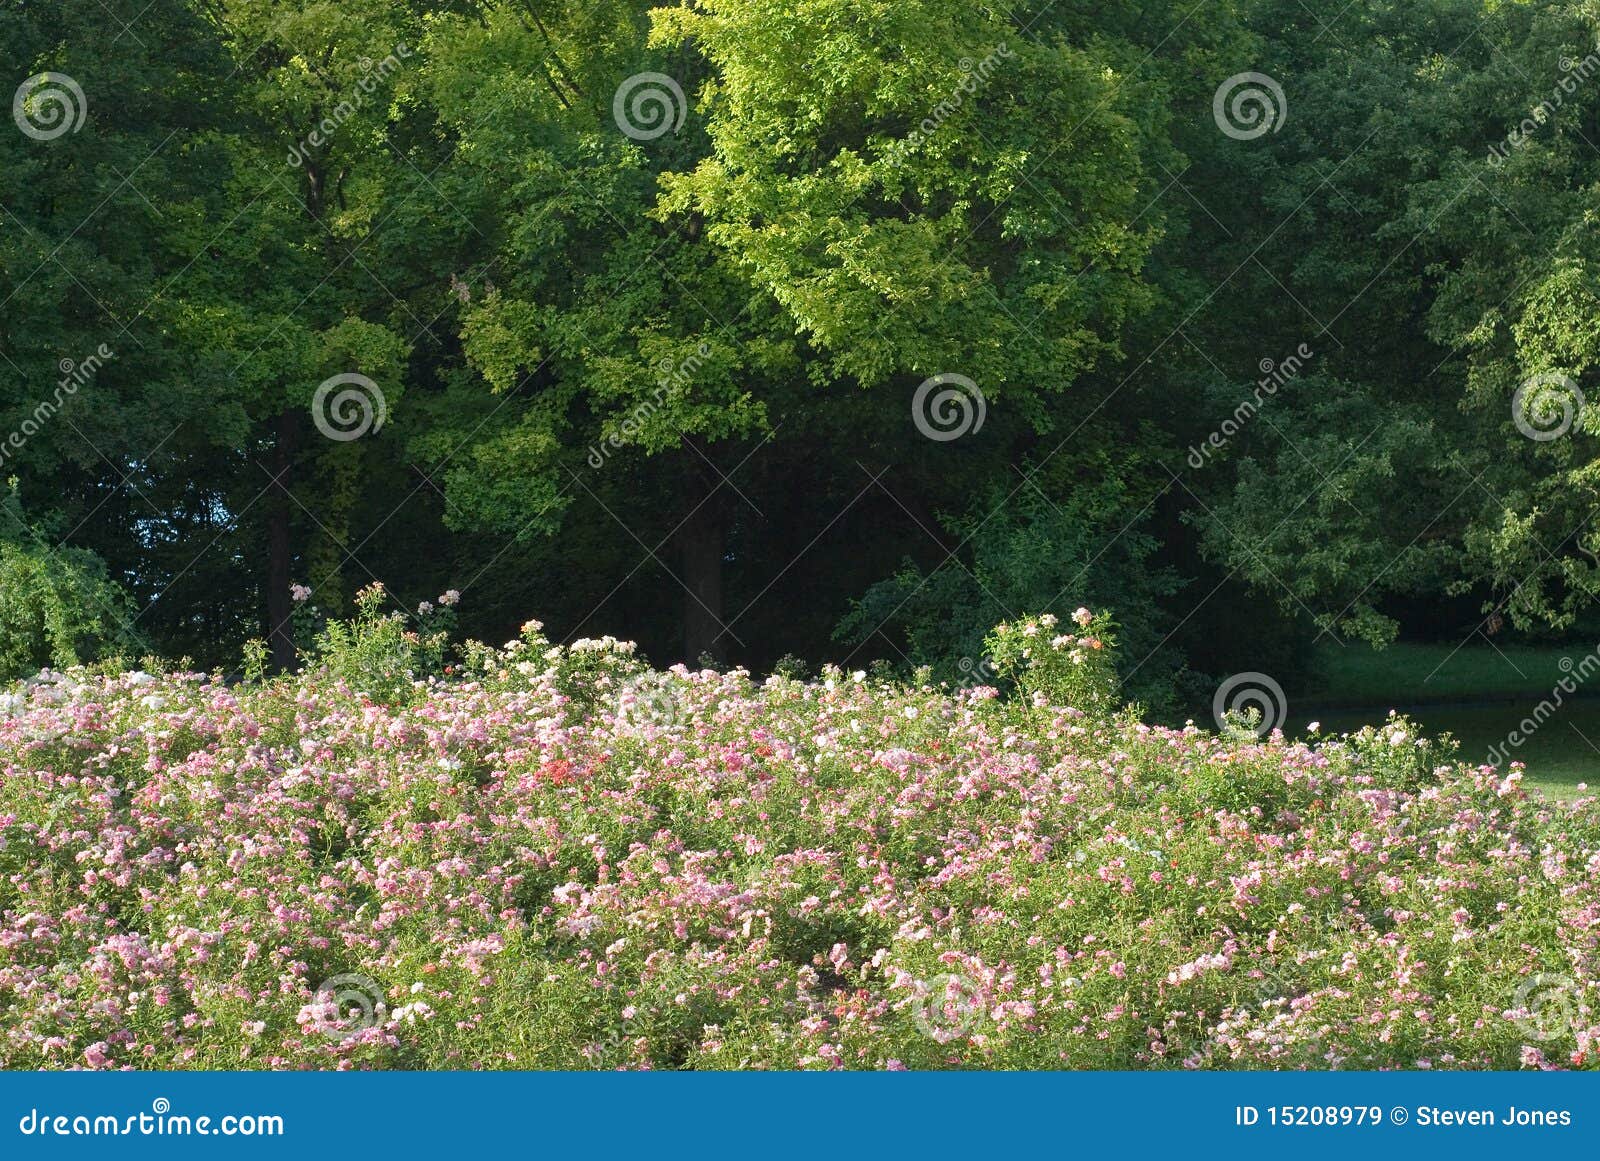 Flowers on a Hill stock image. Image of natural, canopy - 15208979